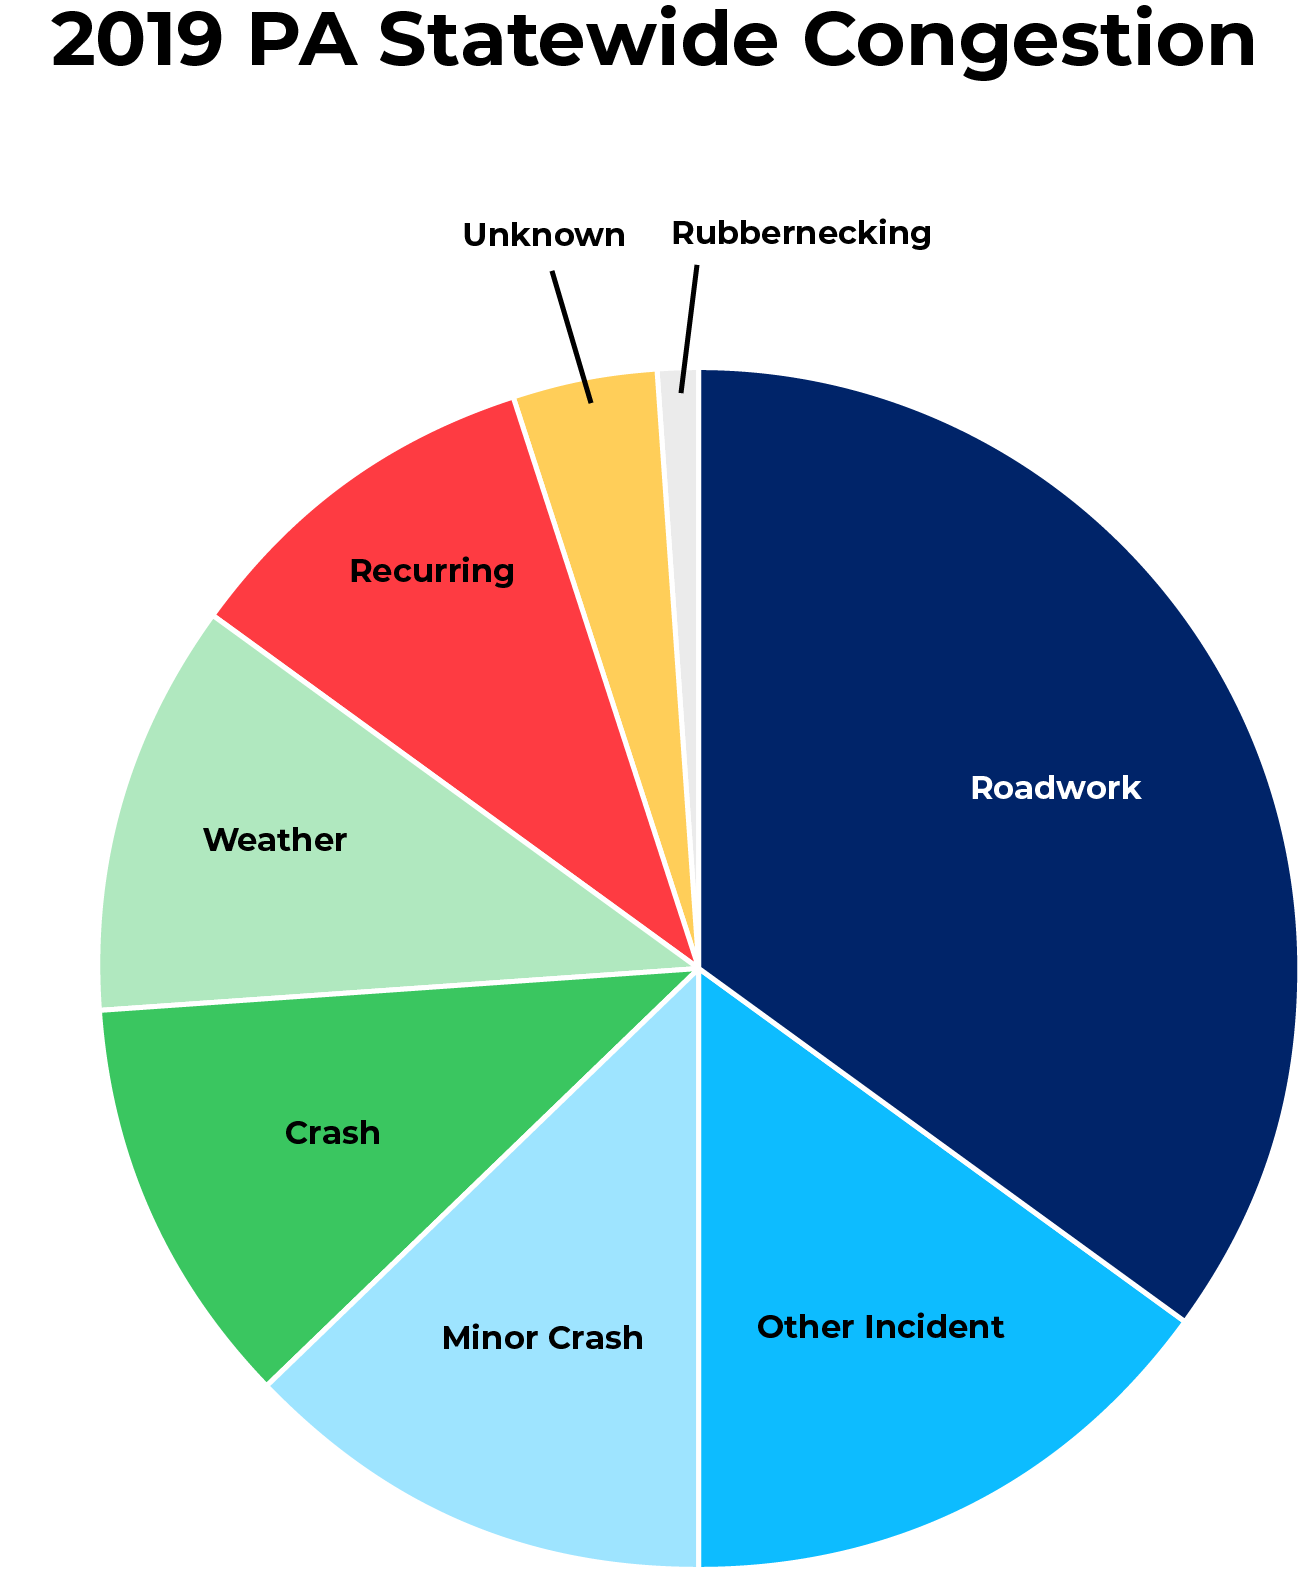 Pie chart showing causes of statewide congestion for PA in 2019. Roadwork 35%, other incident 15%, minor crash 13%, crash 11%, weather 11%, recurring 10%, unknown 4%, rubbernecking 1%.